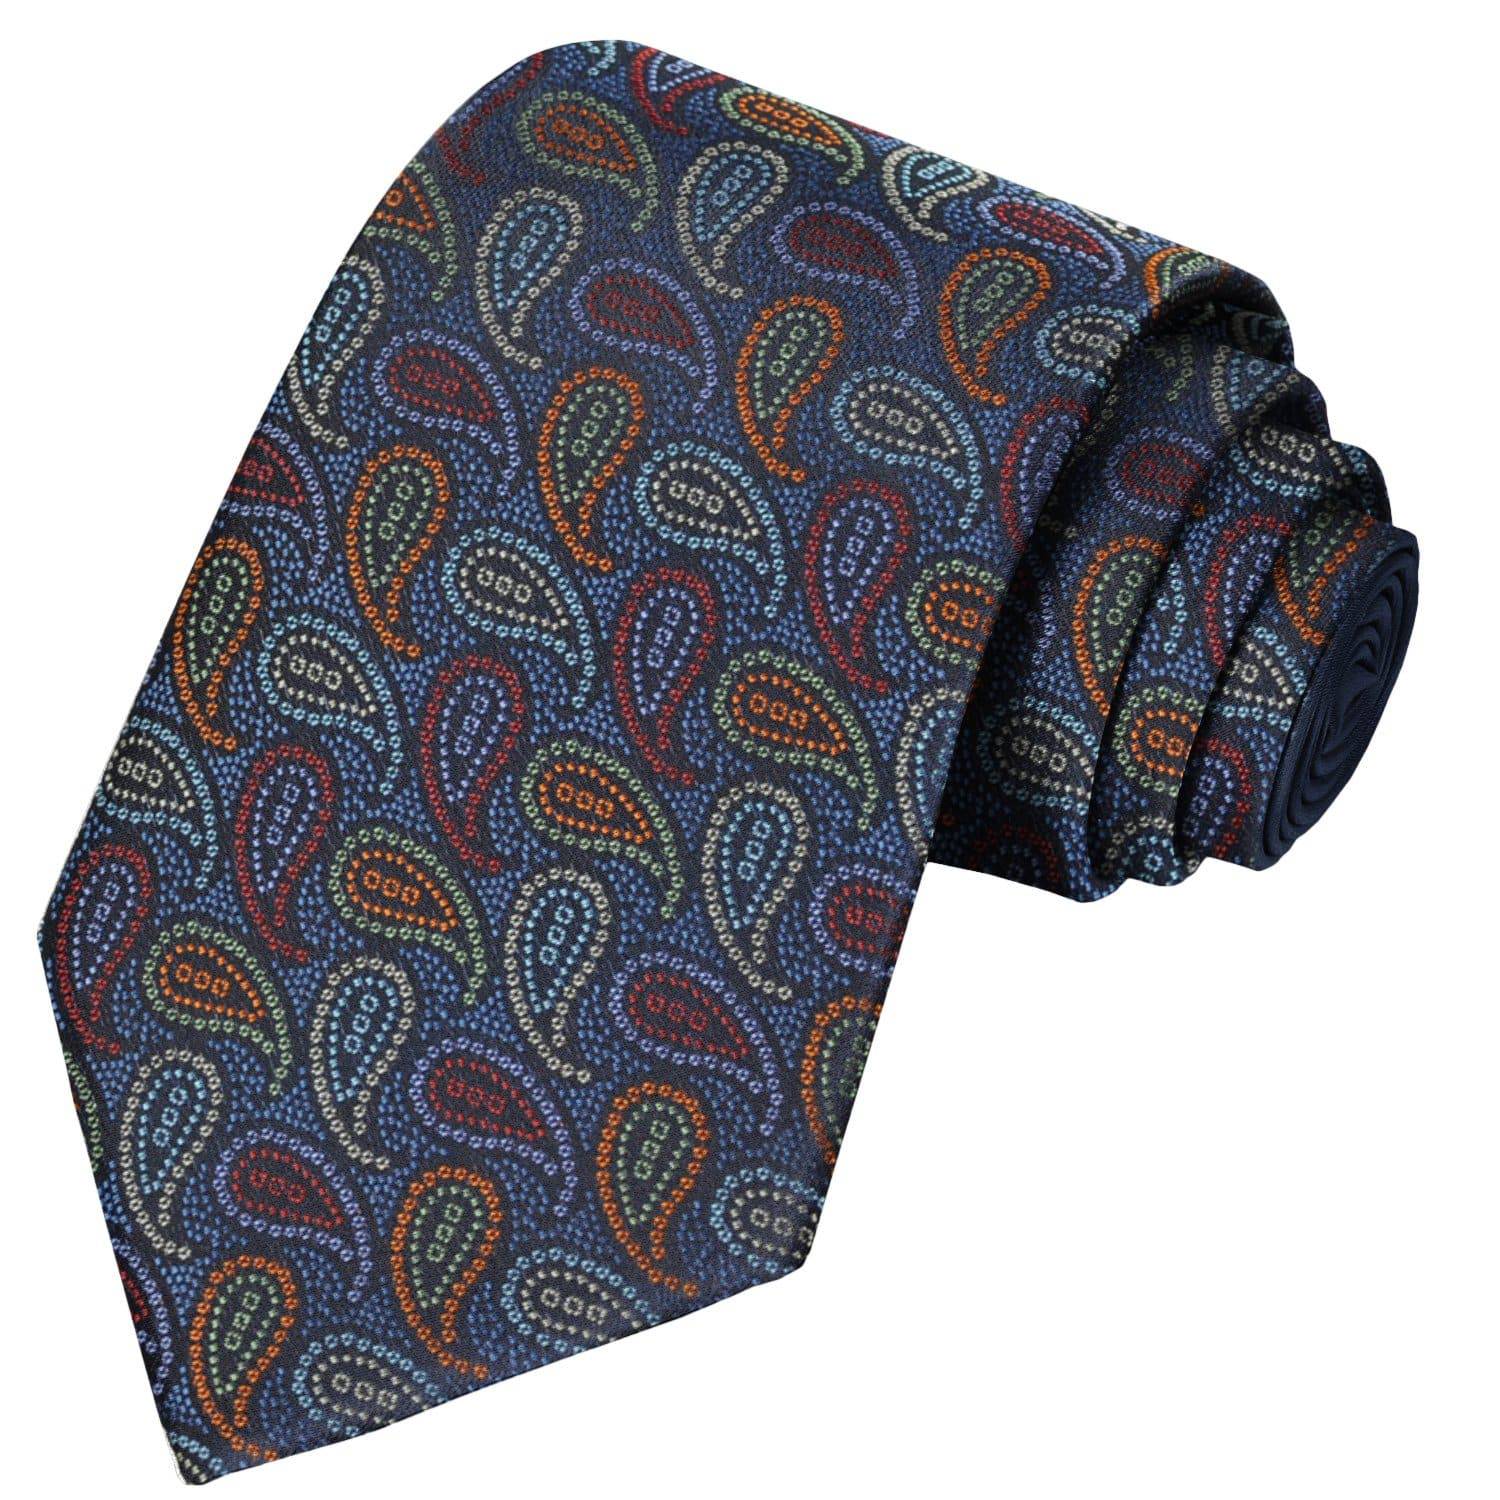 Azure-Electric-Federal Blue-Lime-Royal Purple-Red Paisley Tie - Tie, bowtie, pocket square  | Kissties